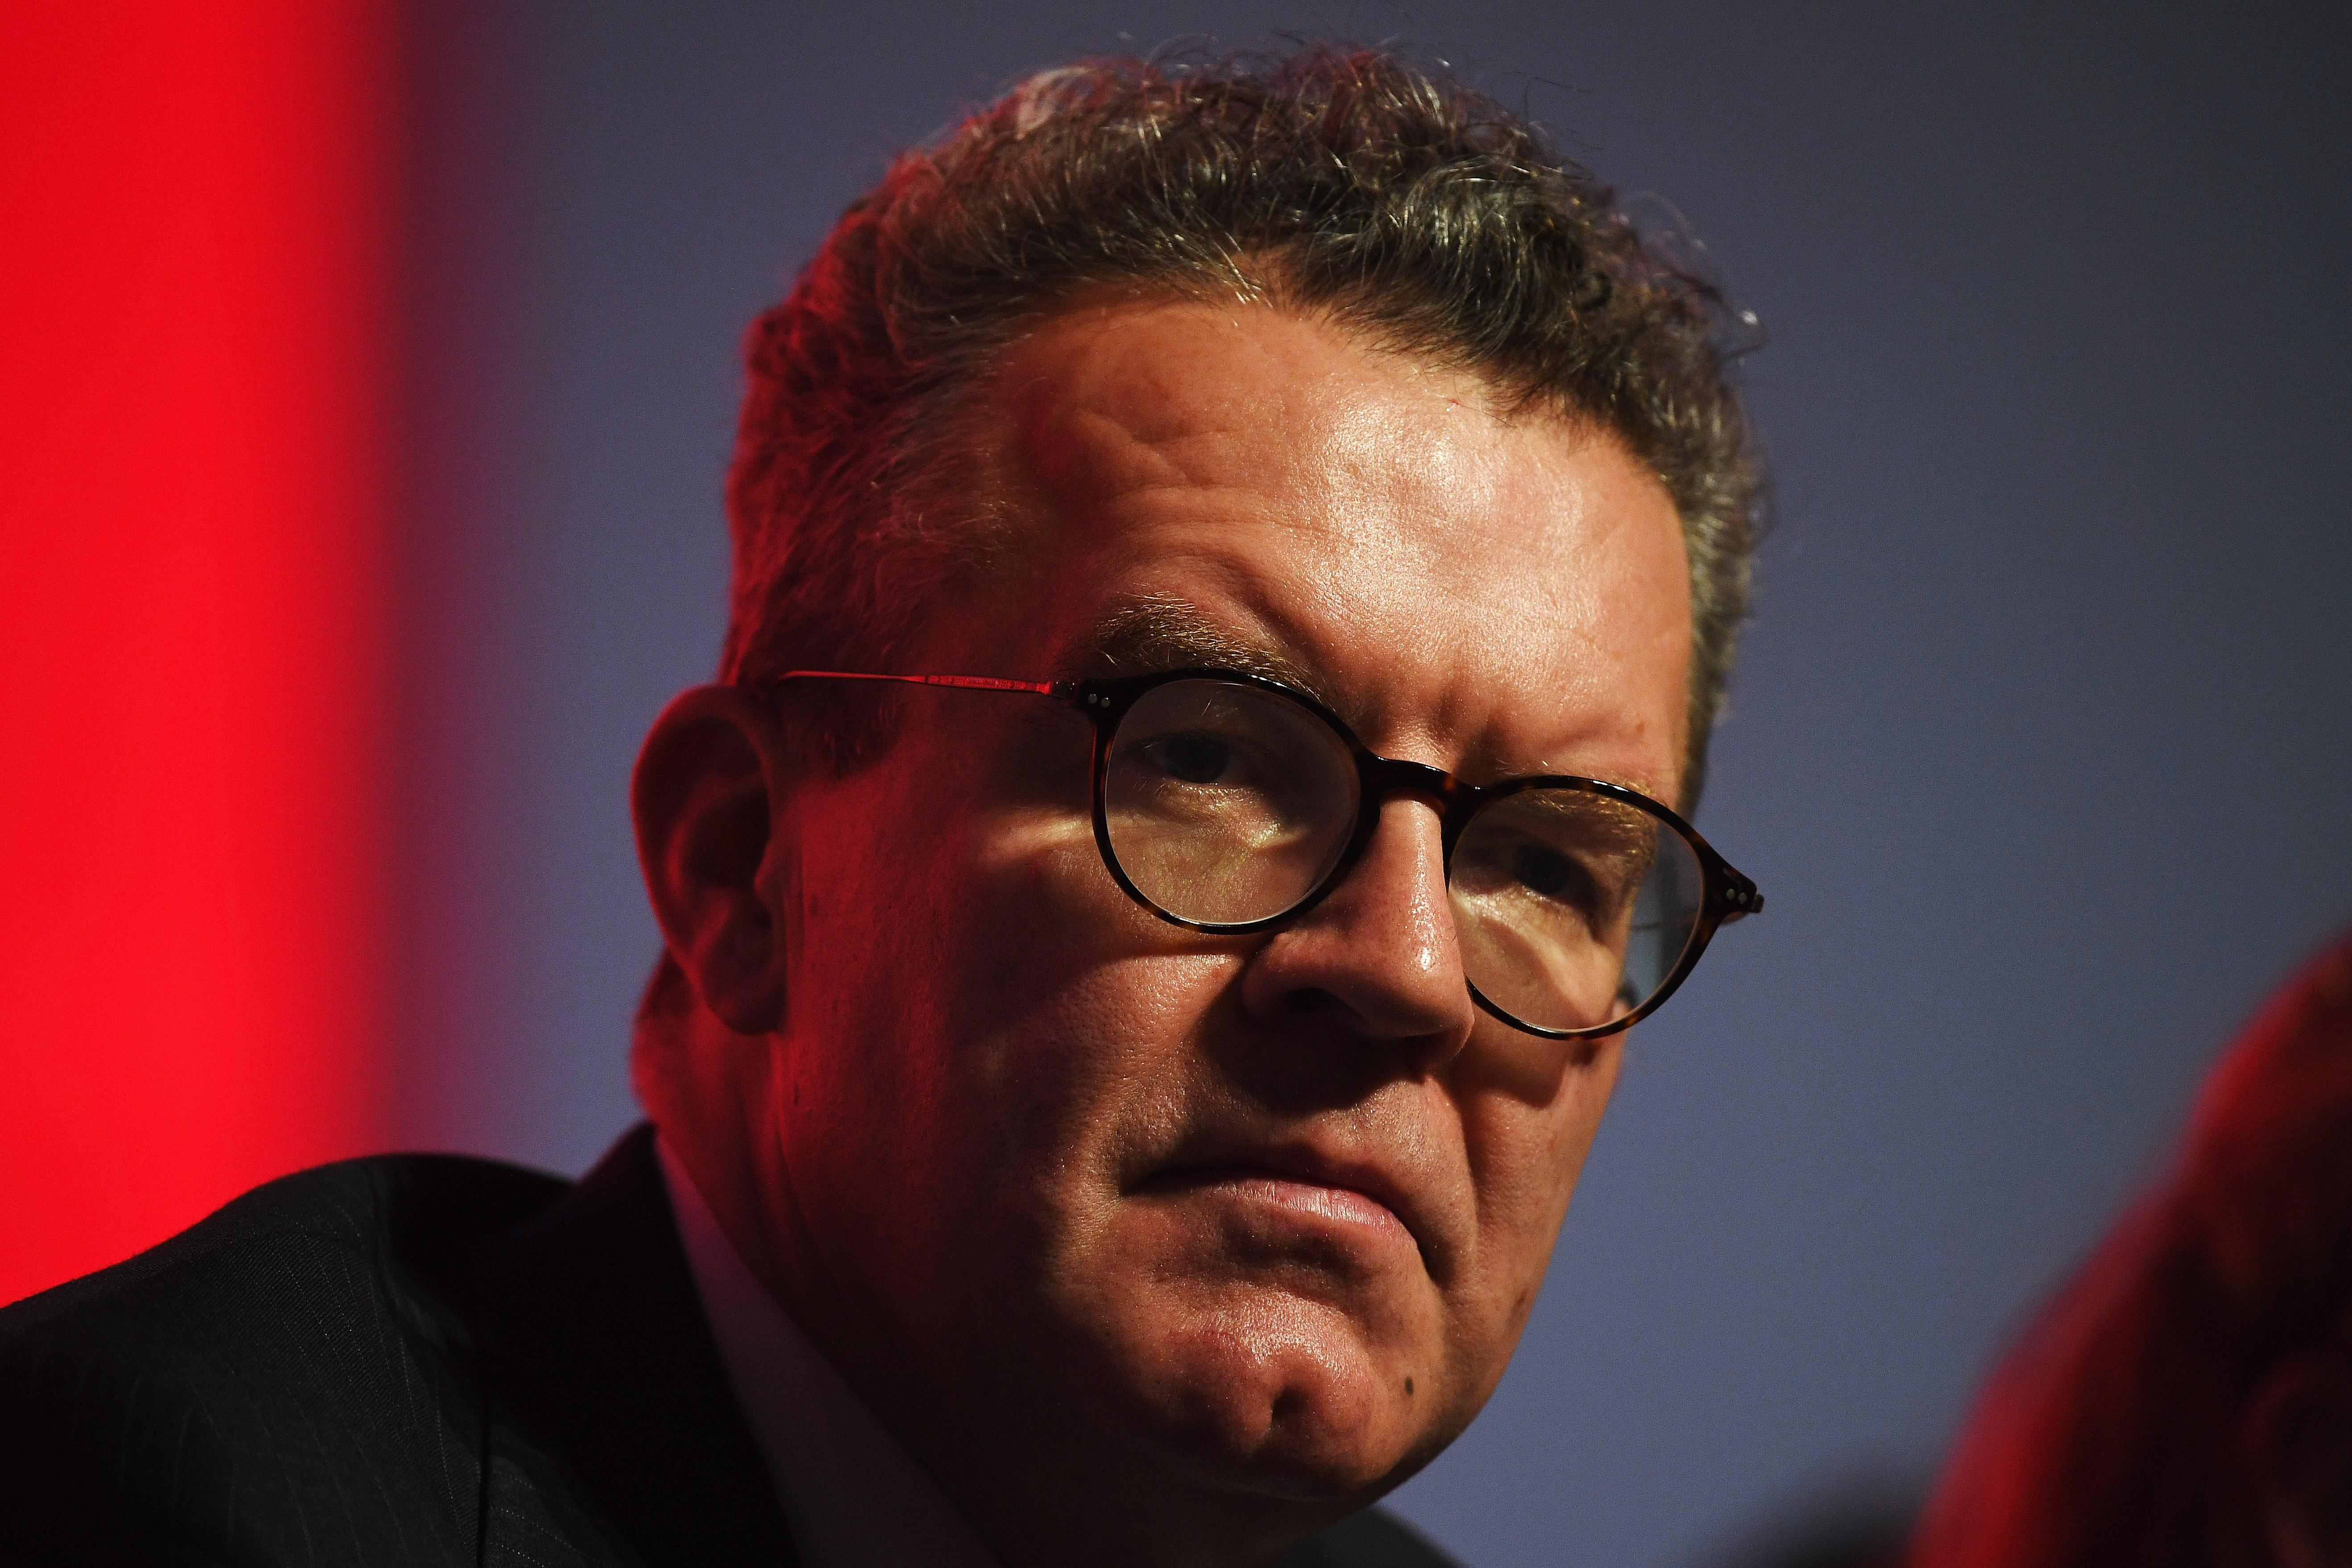 LIVERPOOL, ENGLAND - SEPTEMBER 26:  Deputy Leader of the Labour Party, Tom Watson listens as Labour Party leader, Jeremy Corbyn addresses delegates on day four of the Labour Party conference at the Arena and Convention Centre on September 26, 2018 in Liverpool, England. In his closing speech to the conference the Labour leader will promise to "kickstart a green jobs revolution" and expand the provision of free childcare should Labour win power.  (Photo by Leon Neal/Getty Images)